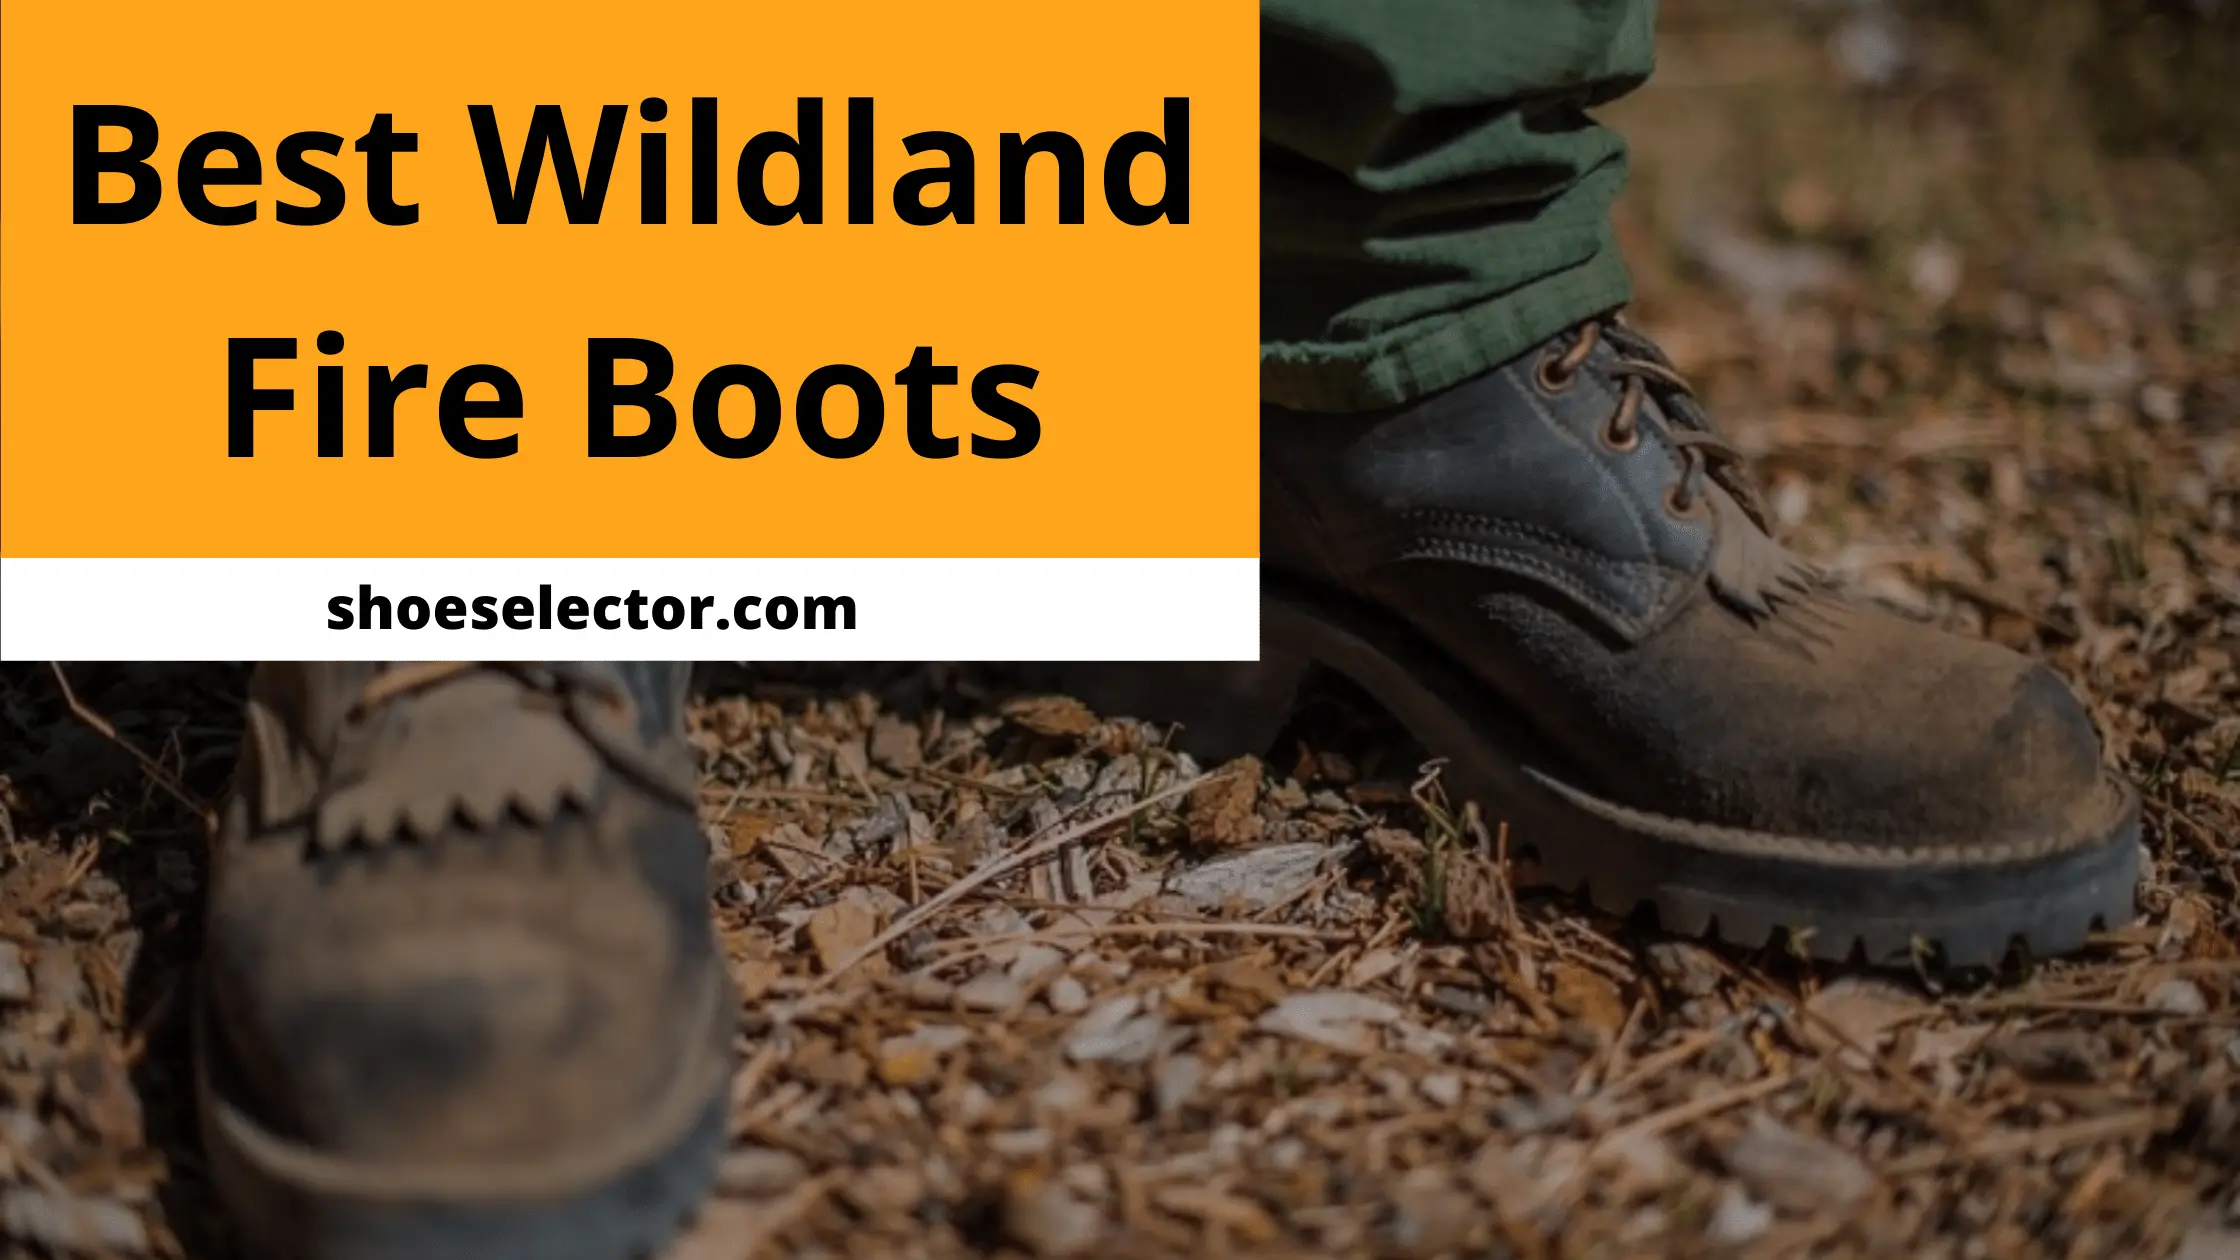 Best Wildland Fire Boots - Complete Guide